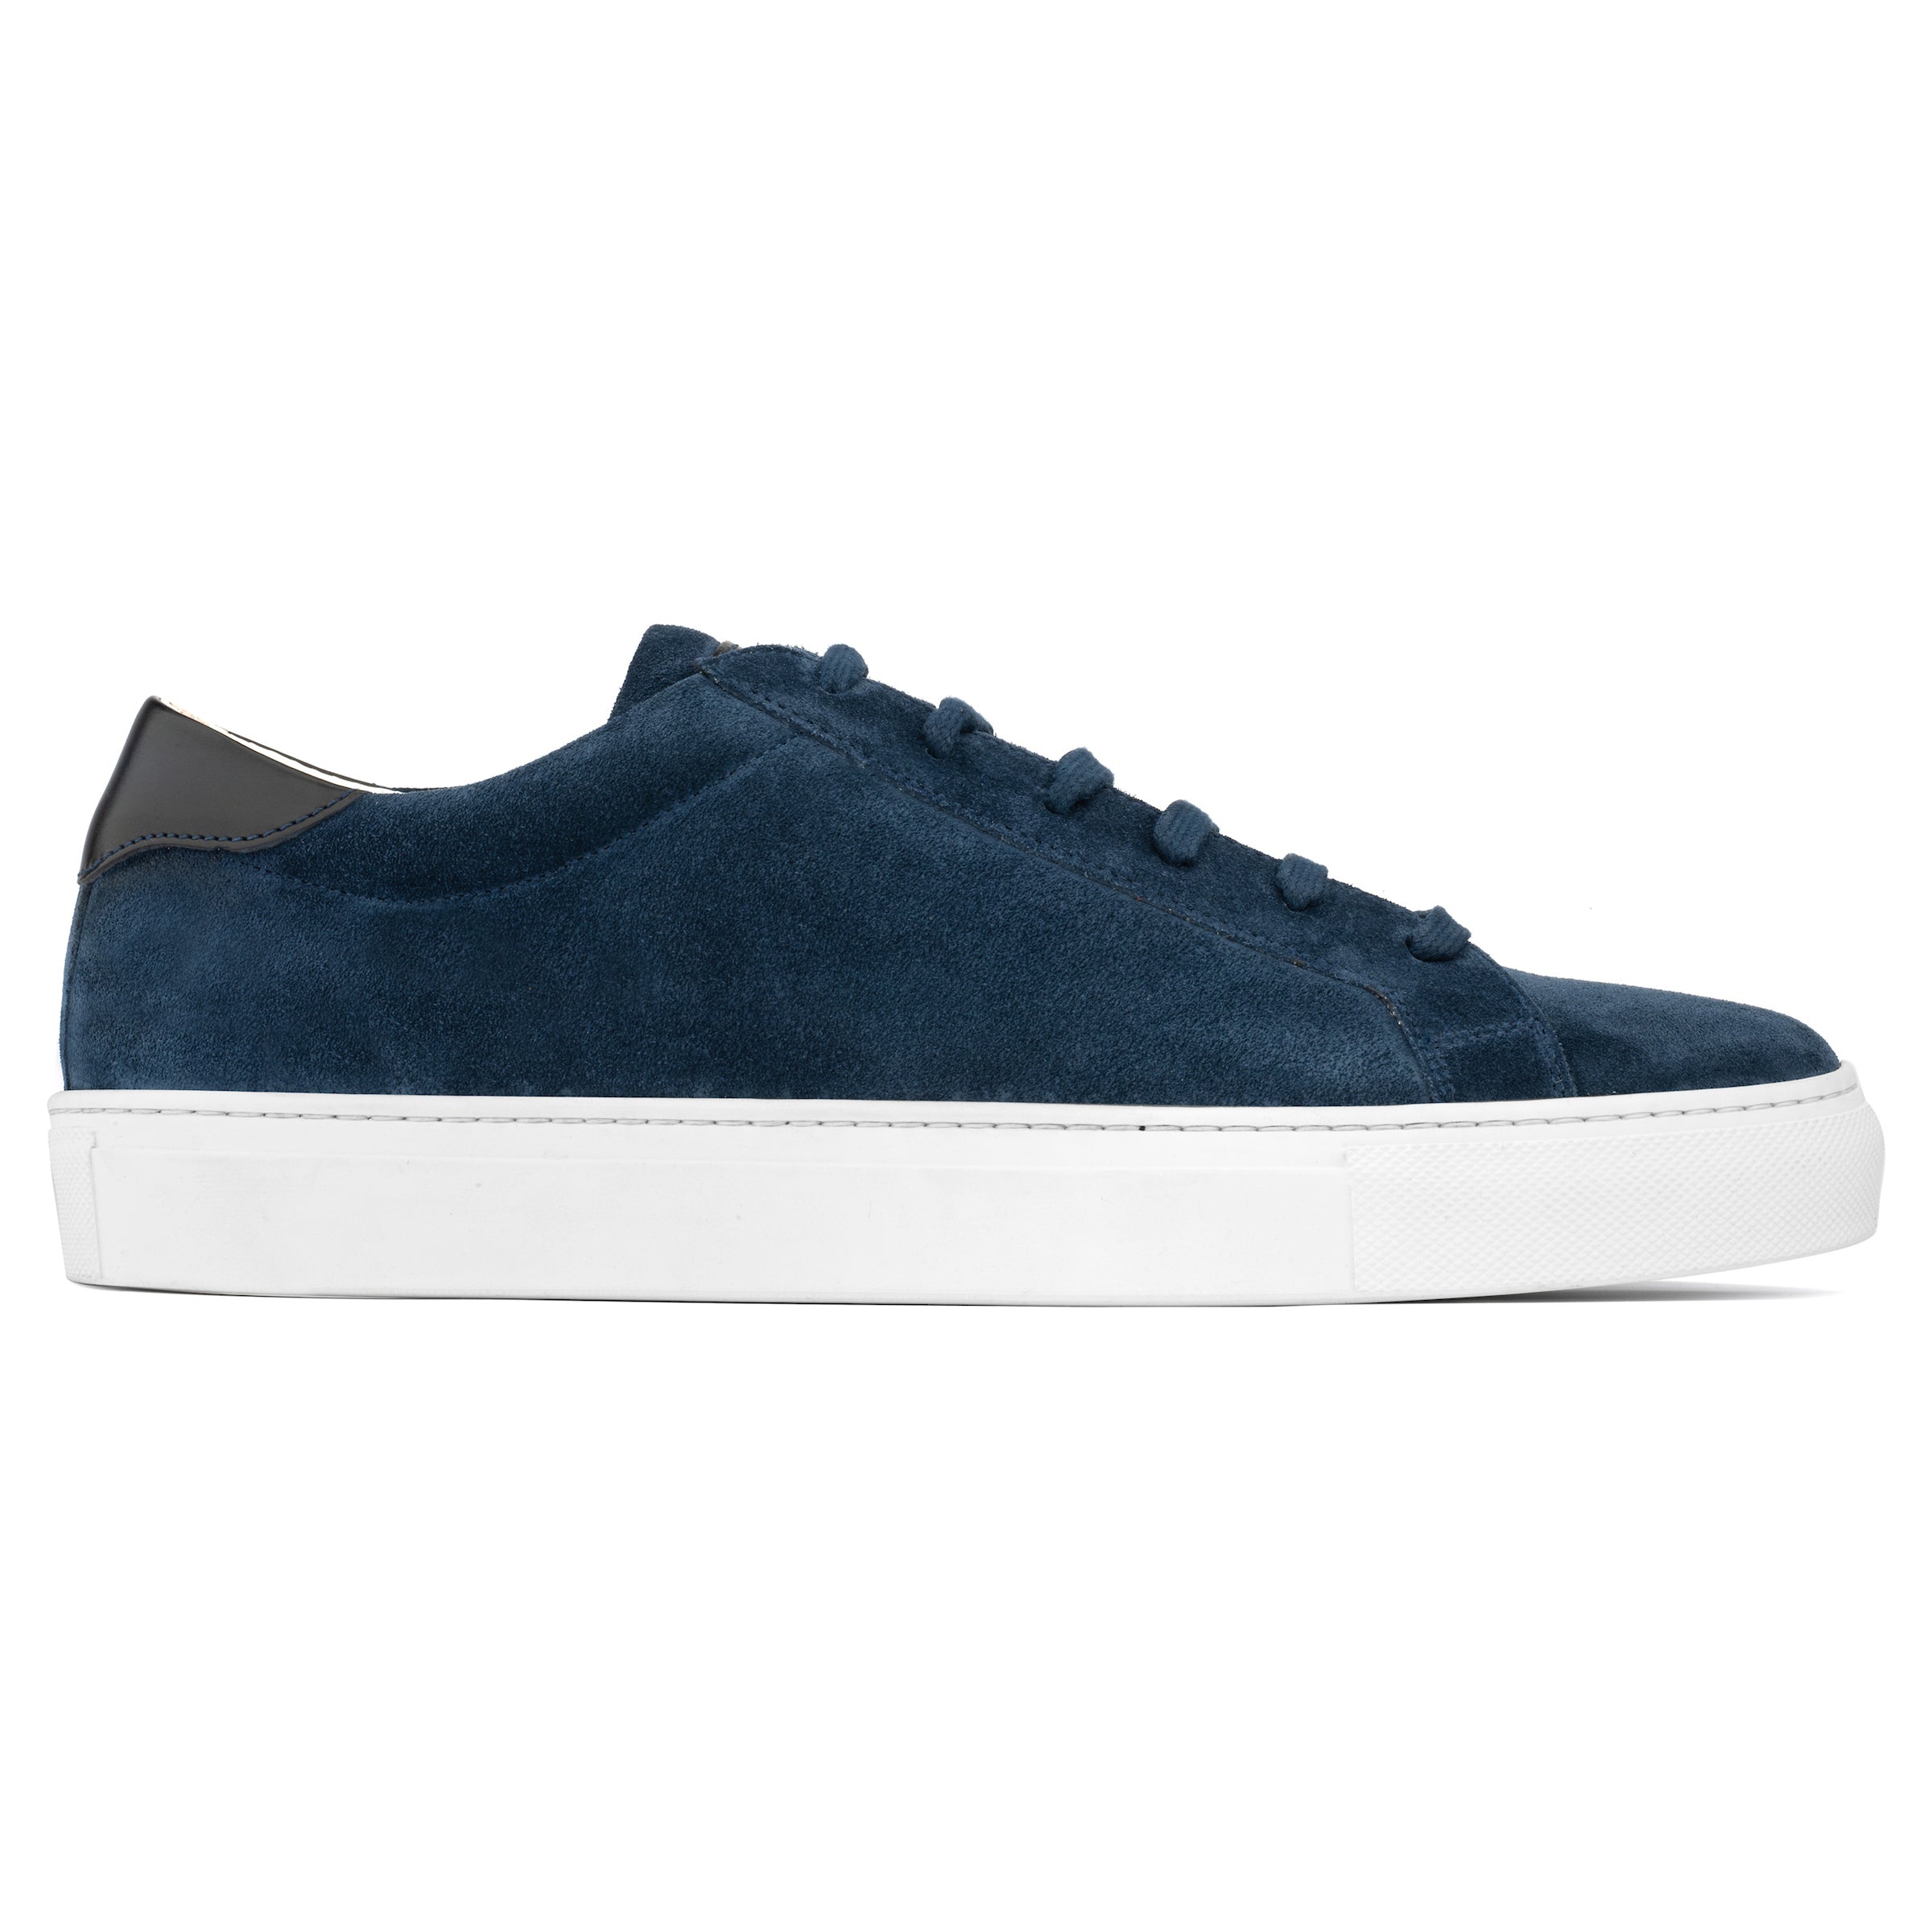 Pacer Blue Suede Sneaker